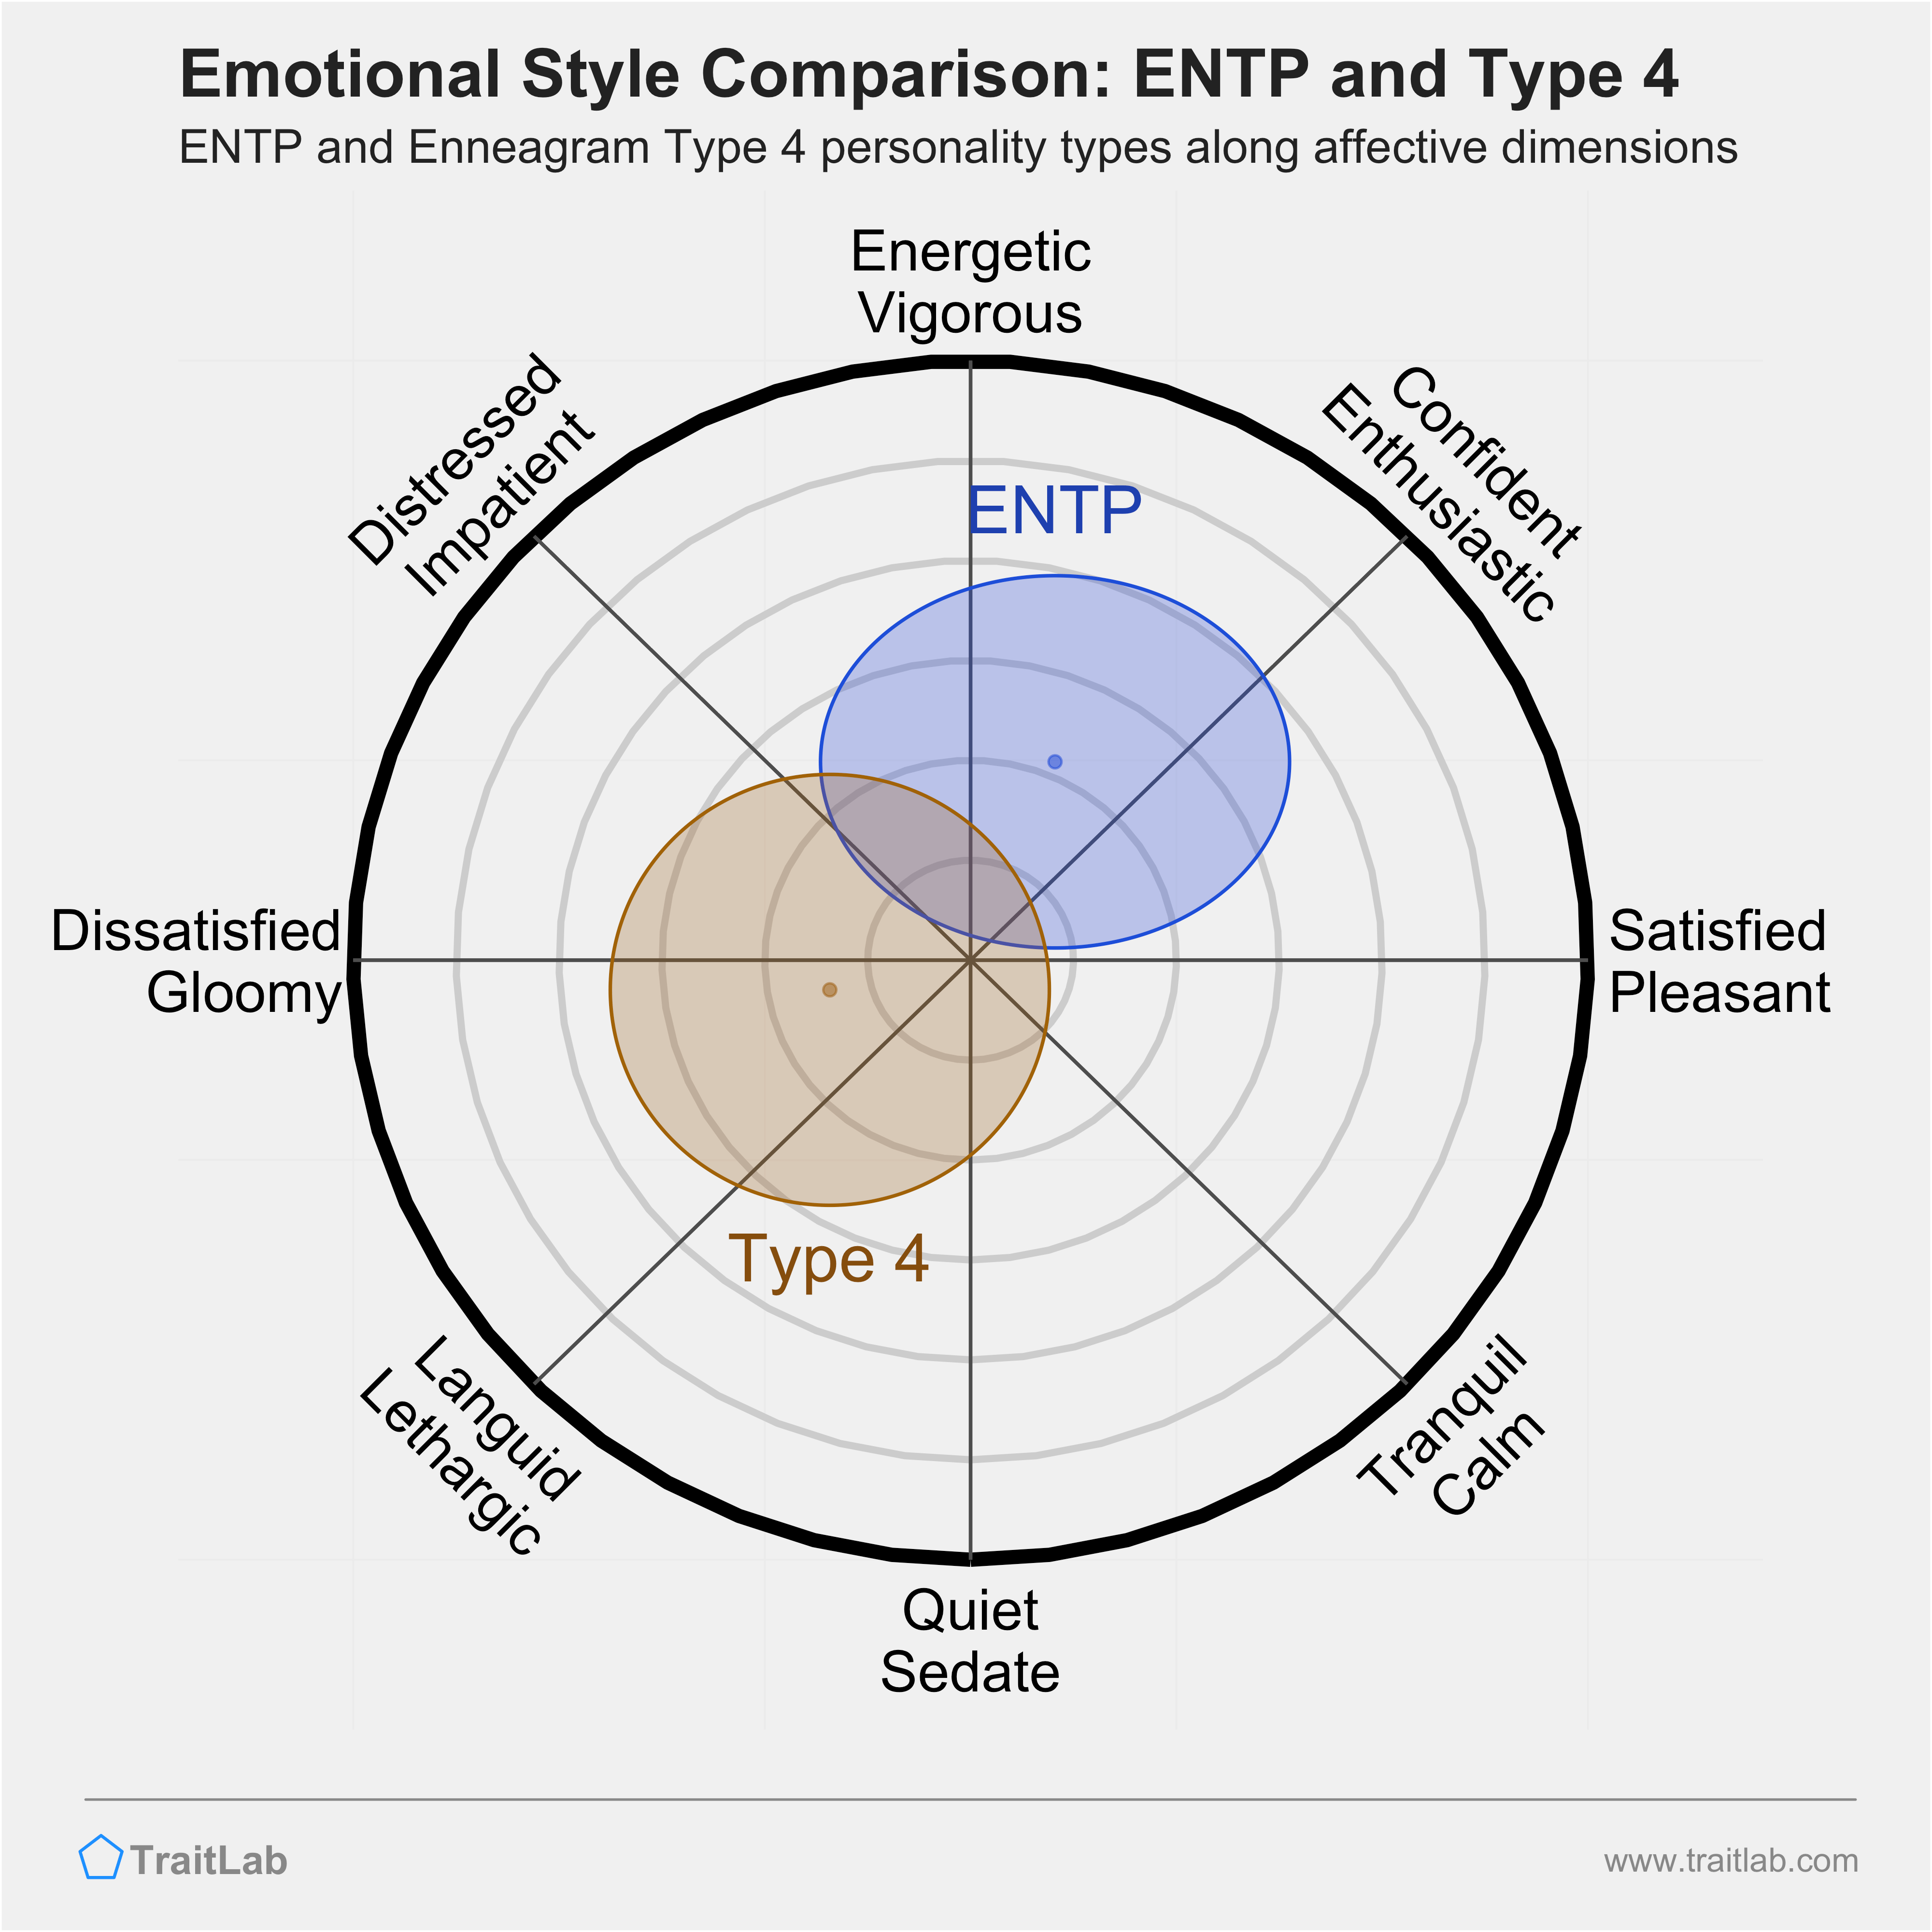 ENTP and Type 4 comparison across emotional (affective) dimensions